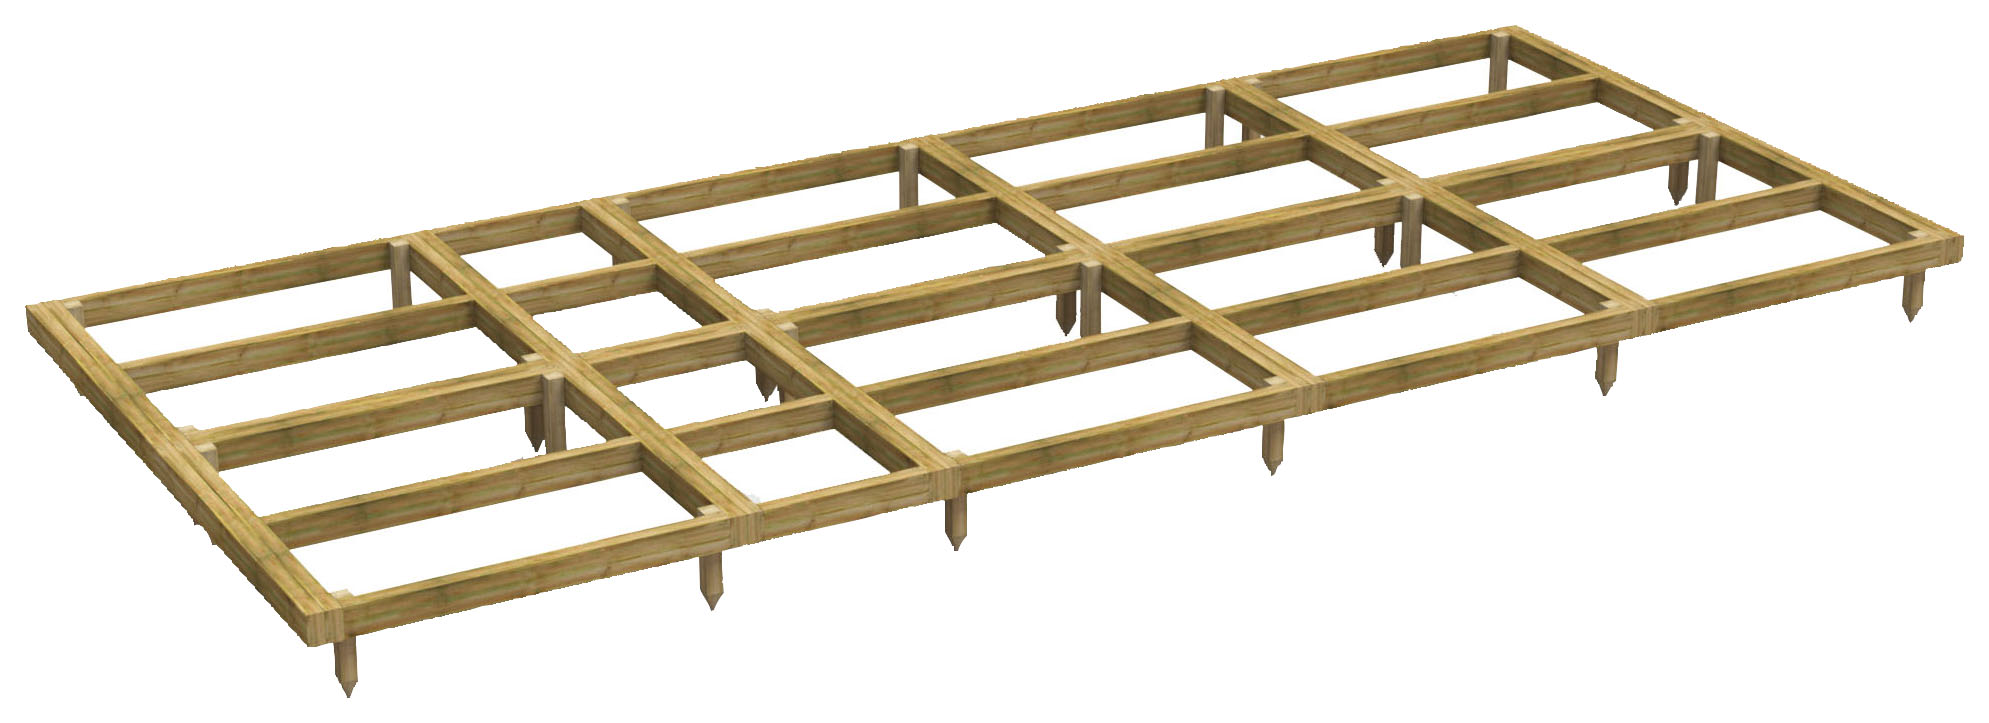 Image of Power Sheds 18 x 8ft Pressure Treated Garden Building Base Kit